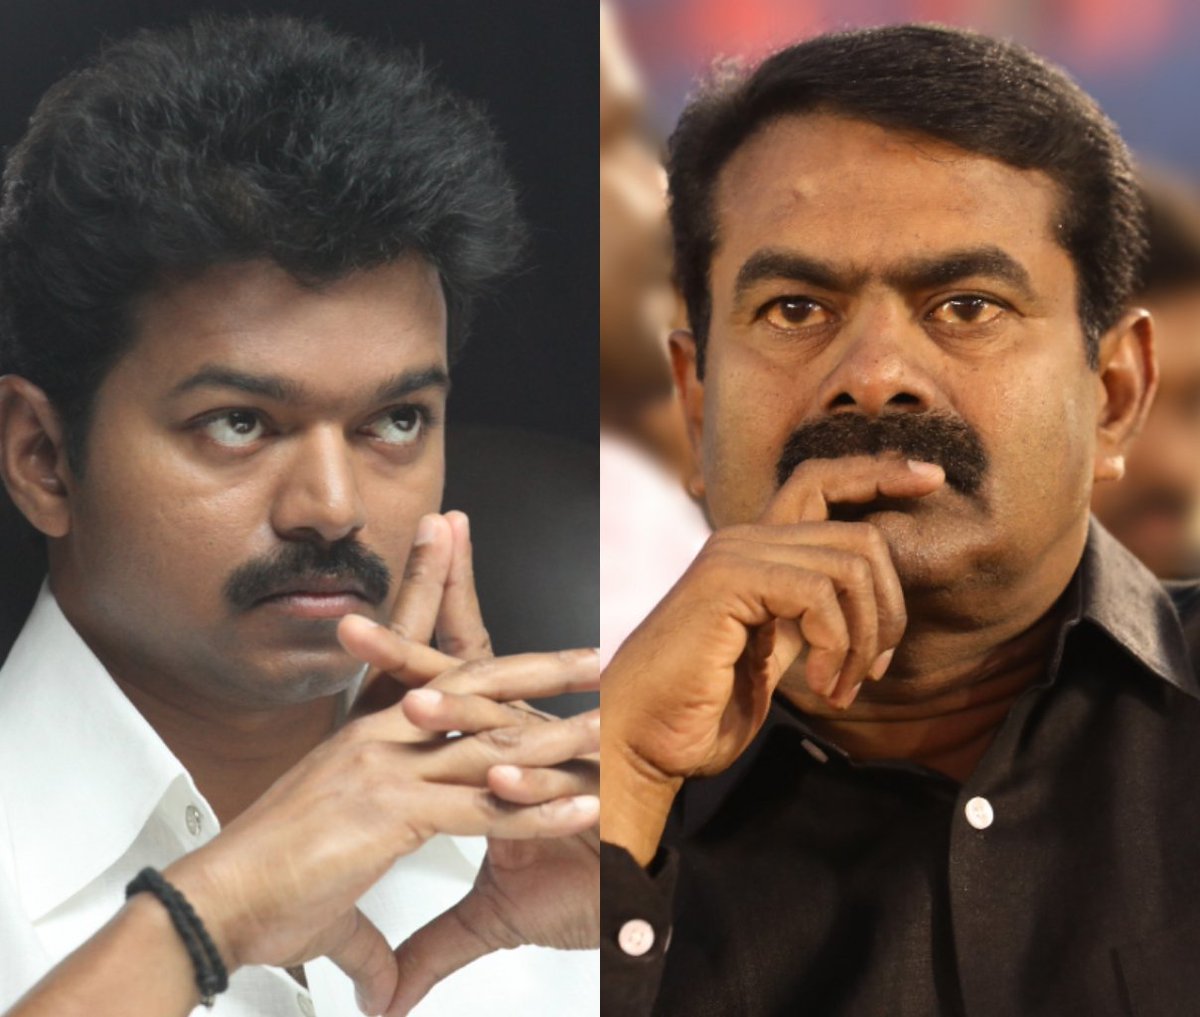 After noticing  #Vijay actively taking part in Sri Lankan Tamils' issues,  #Seeman had knocked on the door of Vijay with Pagalavan in 2010. His ulterior motive was to exploit Vijay's star power and impose his ideologies on people. To get Vijay's nod, he spoke highly of him.